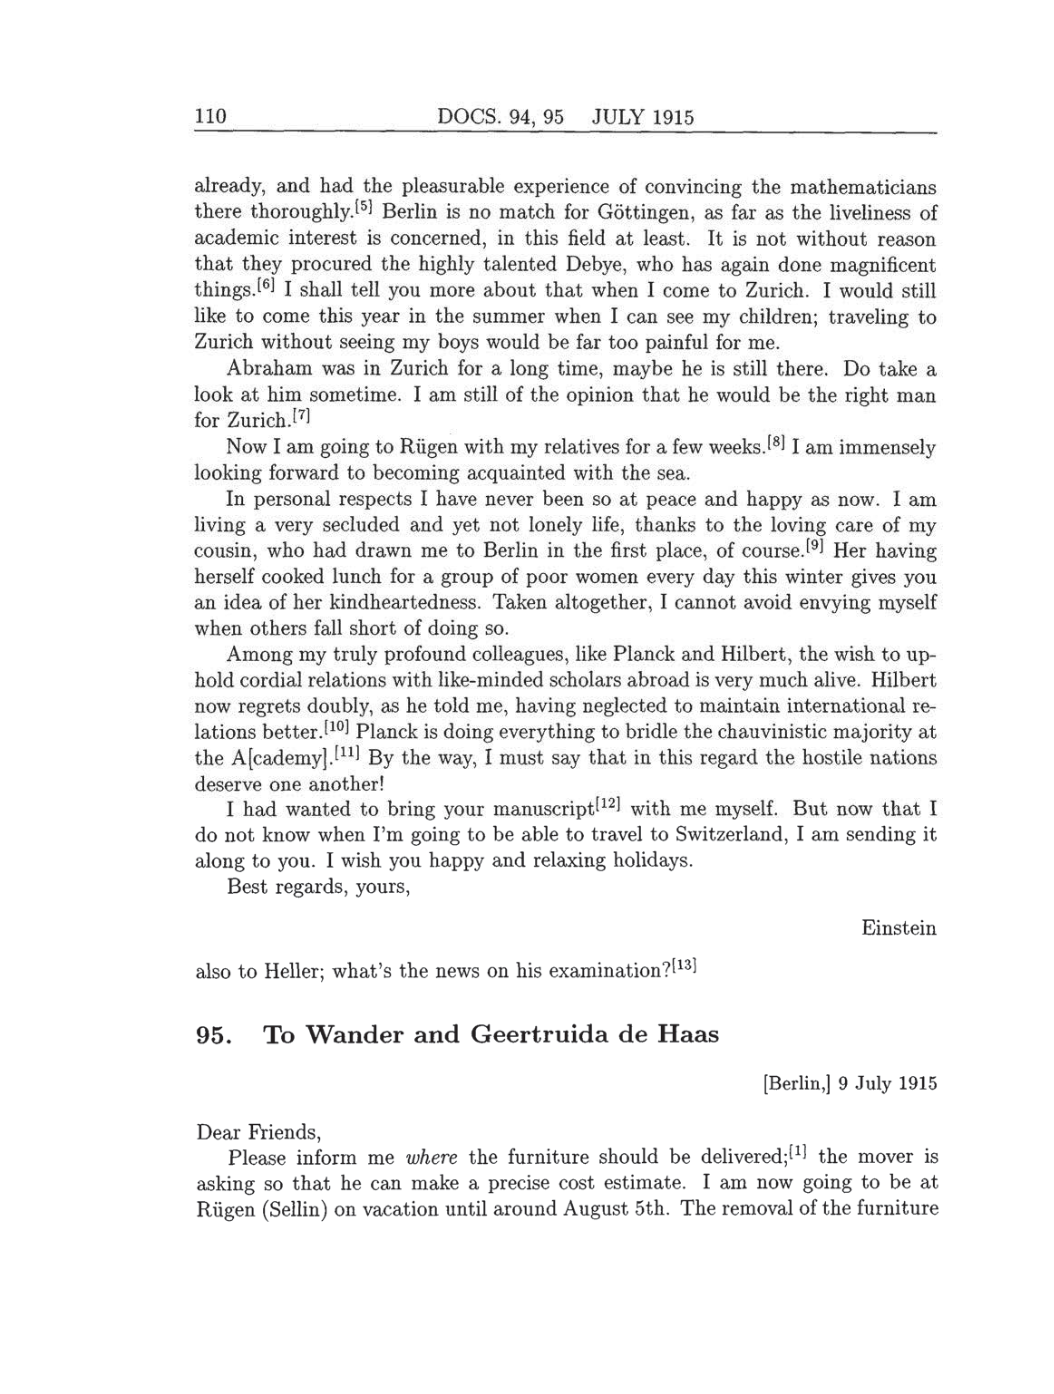 Volume 8: The Berlin Years: Correspondence, 1914-1918 (English translation supplement) page 110